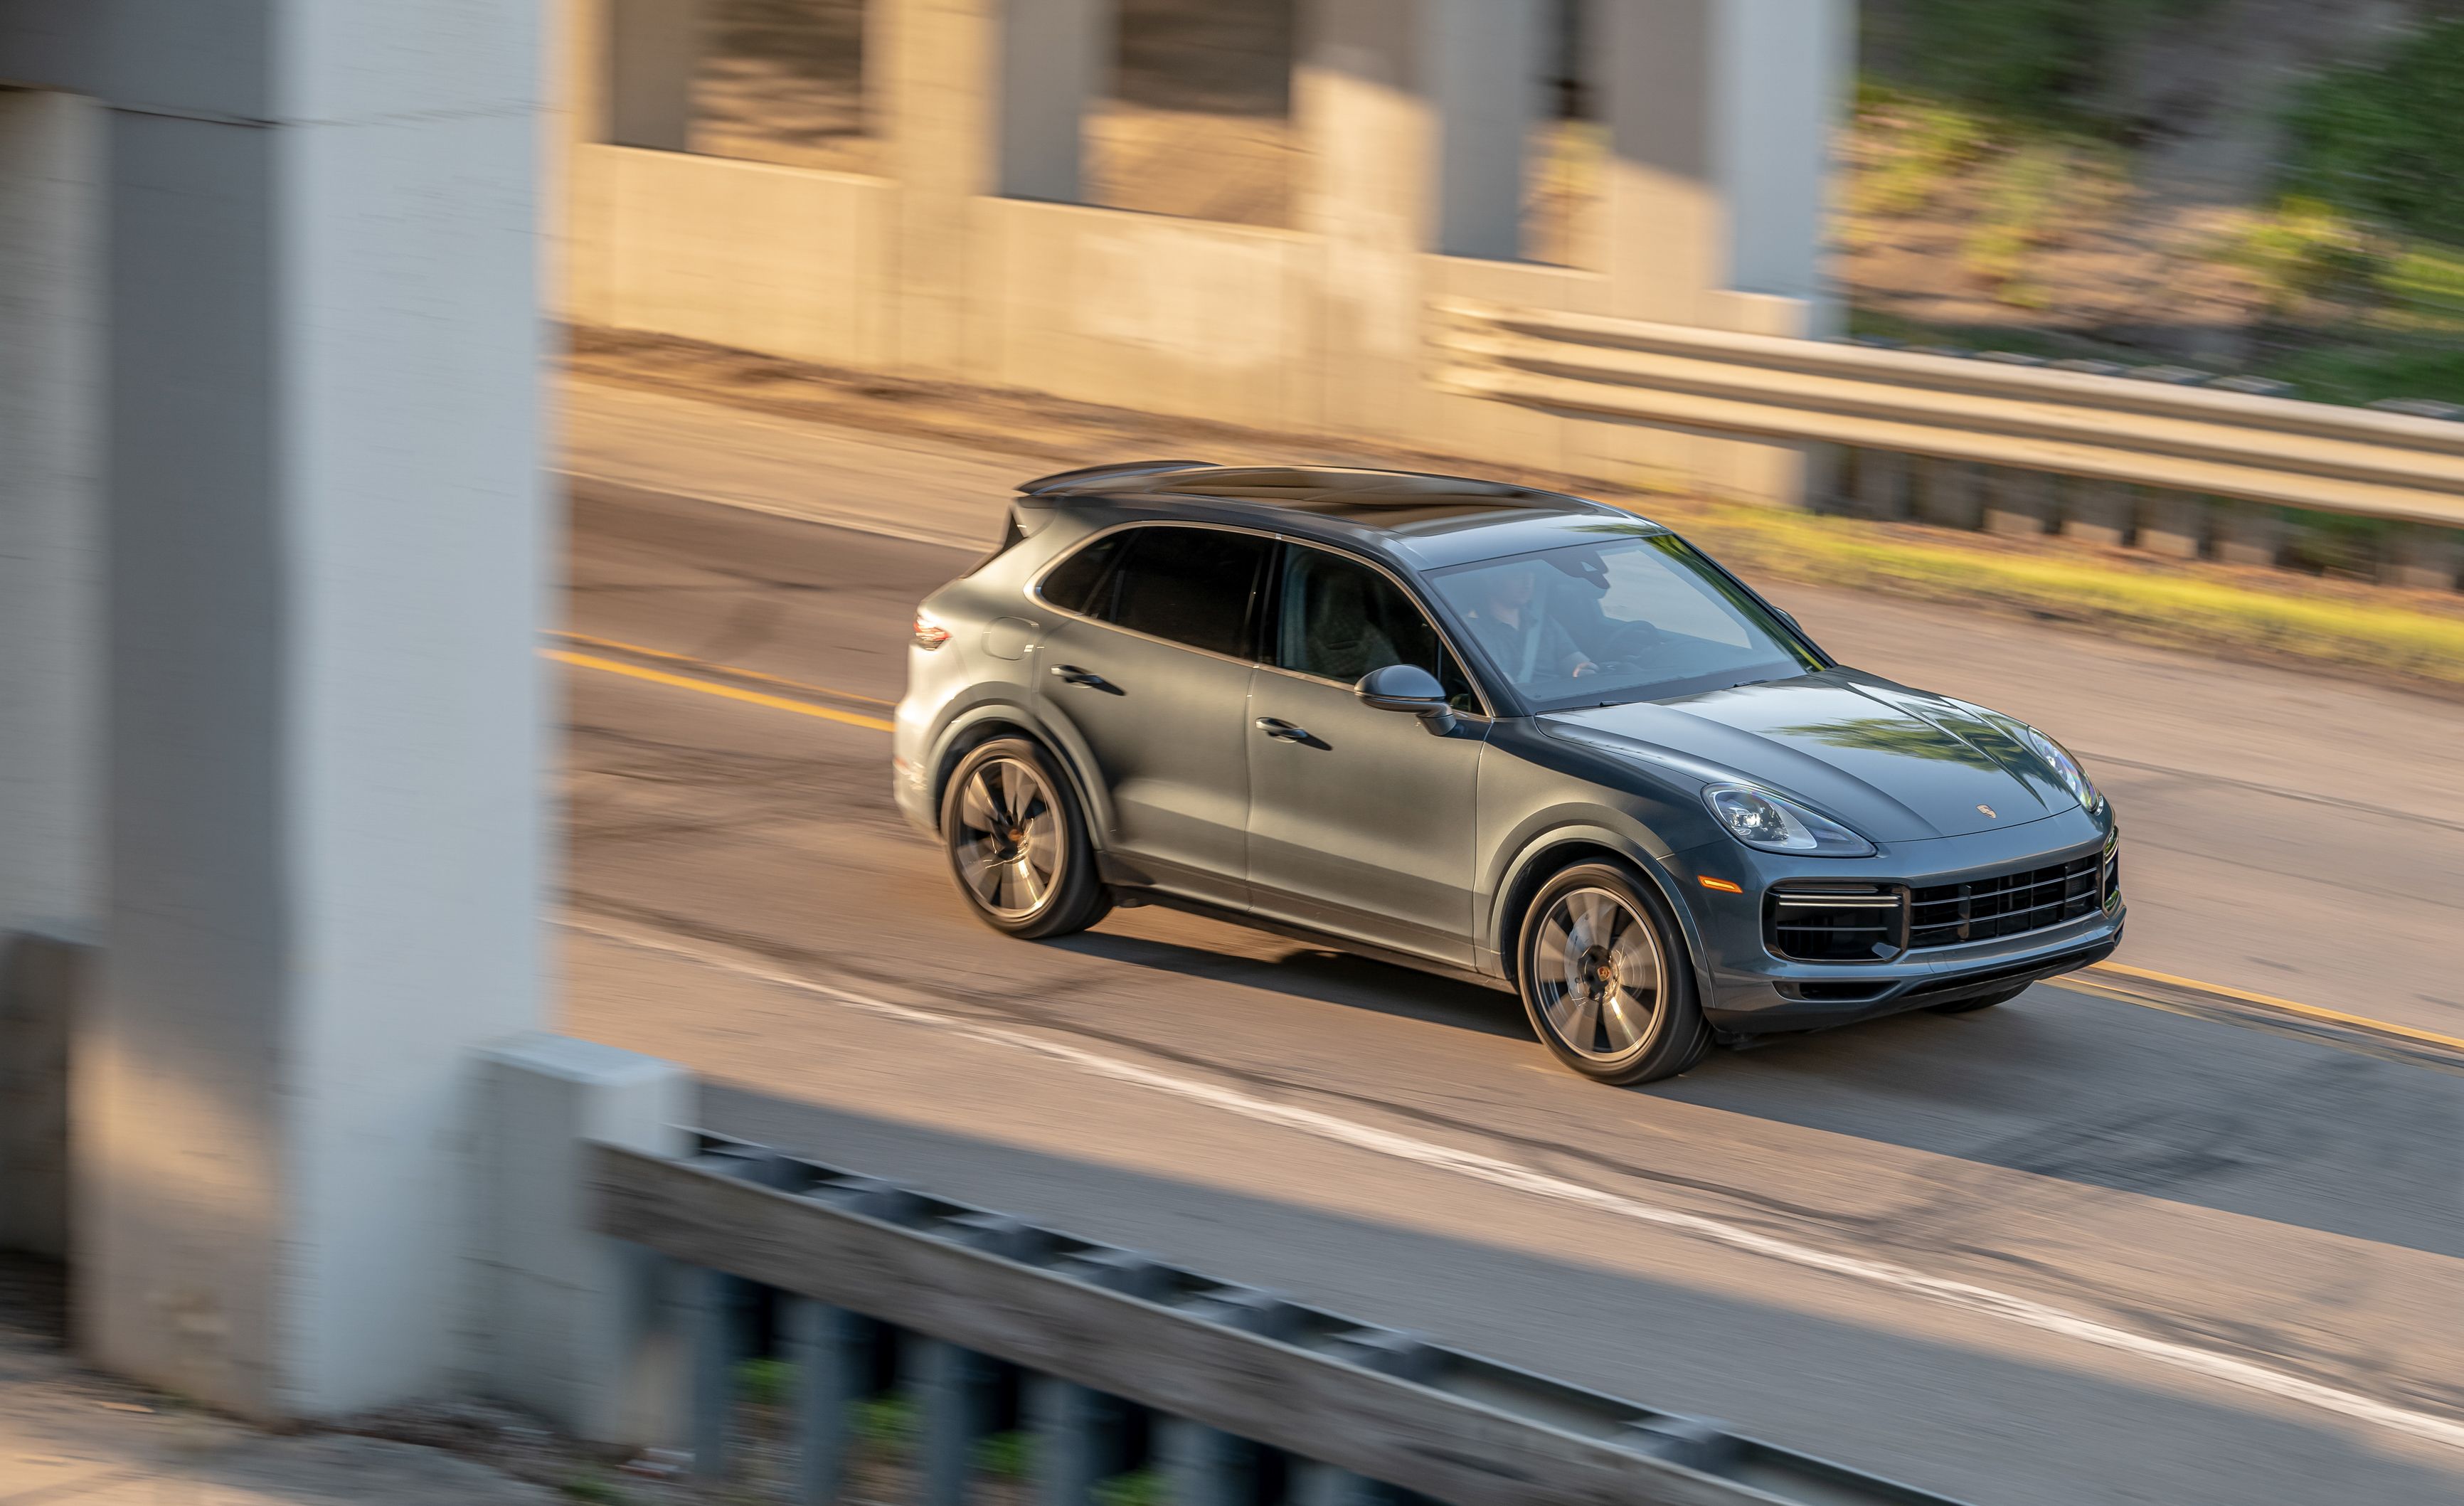 Tested: 2019 Porsche Cayenne Turbo Is the Ultimate Porsche SUV, for Now